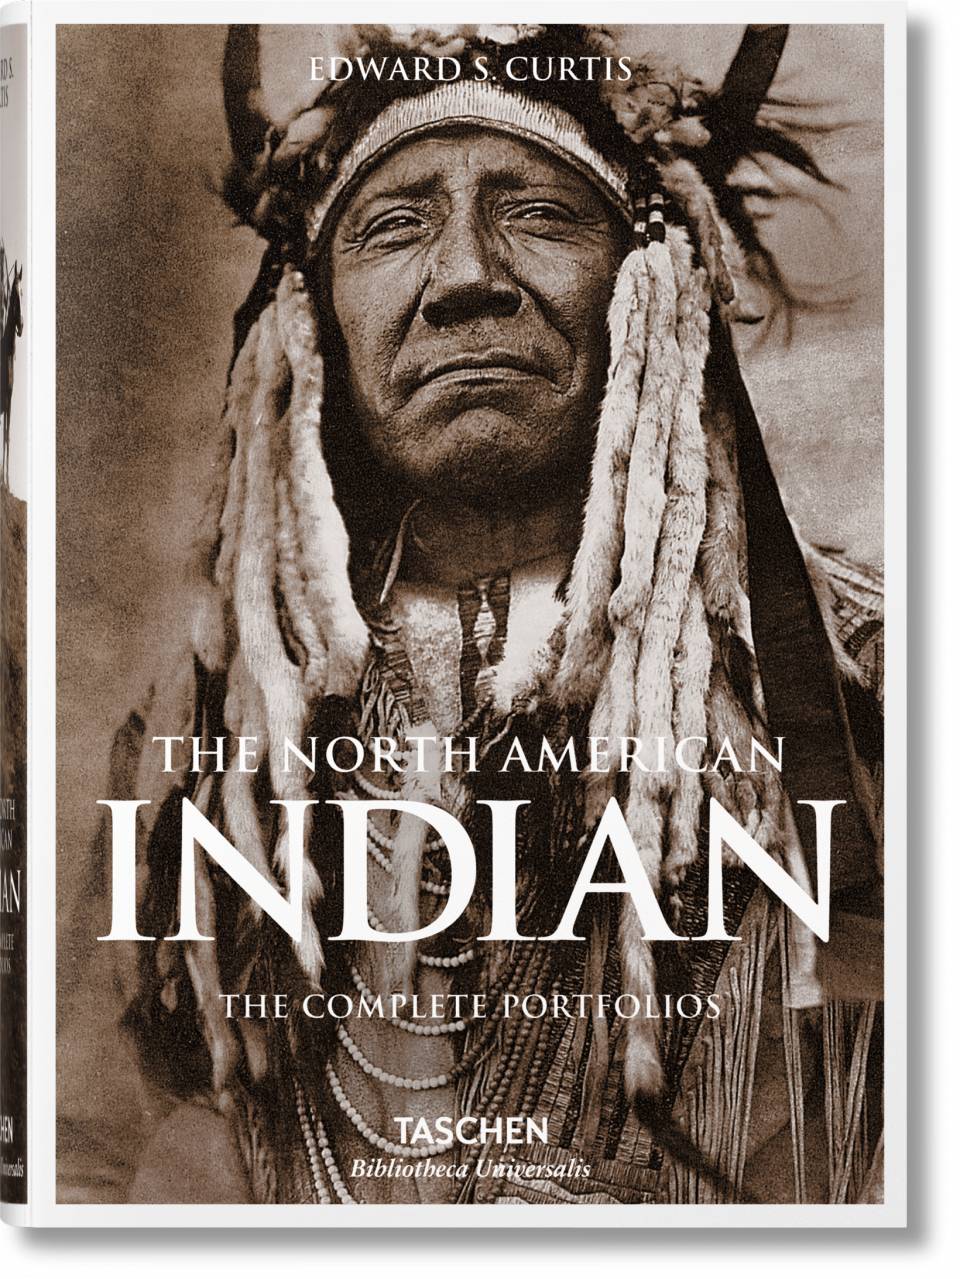 Edward S. Curtis / The North American Indian. The Complete Portfolios